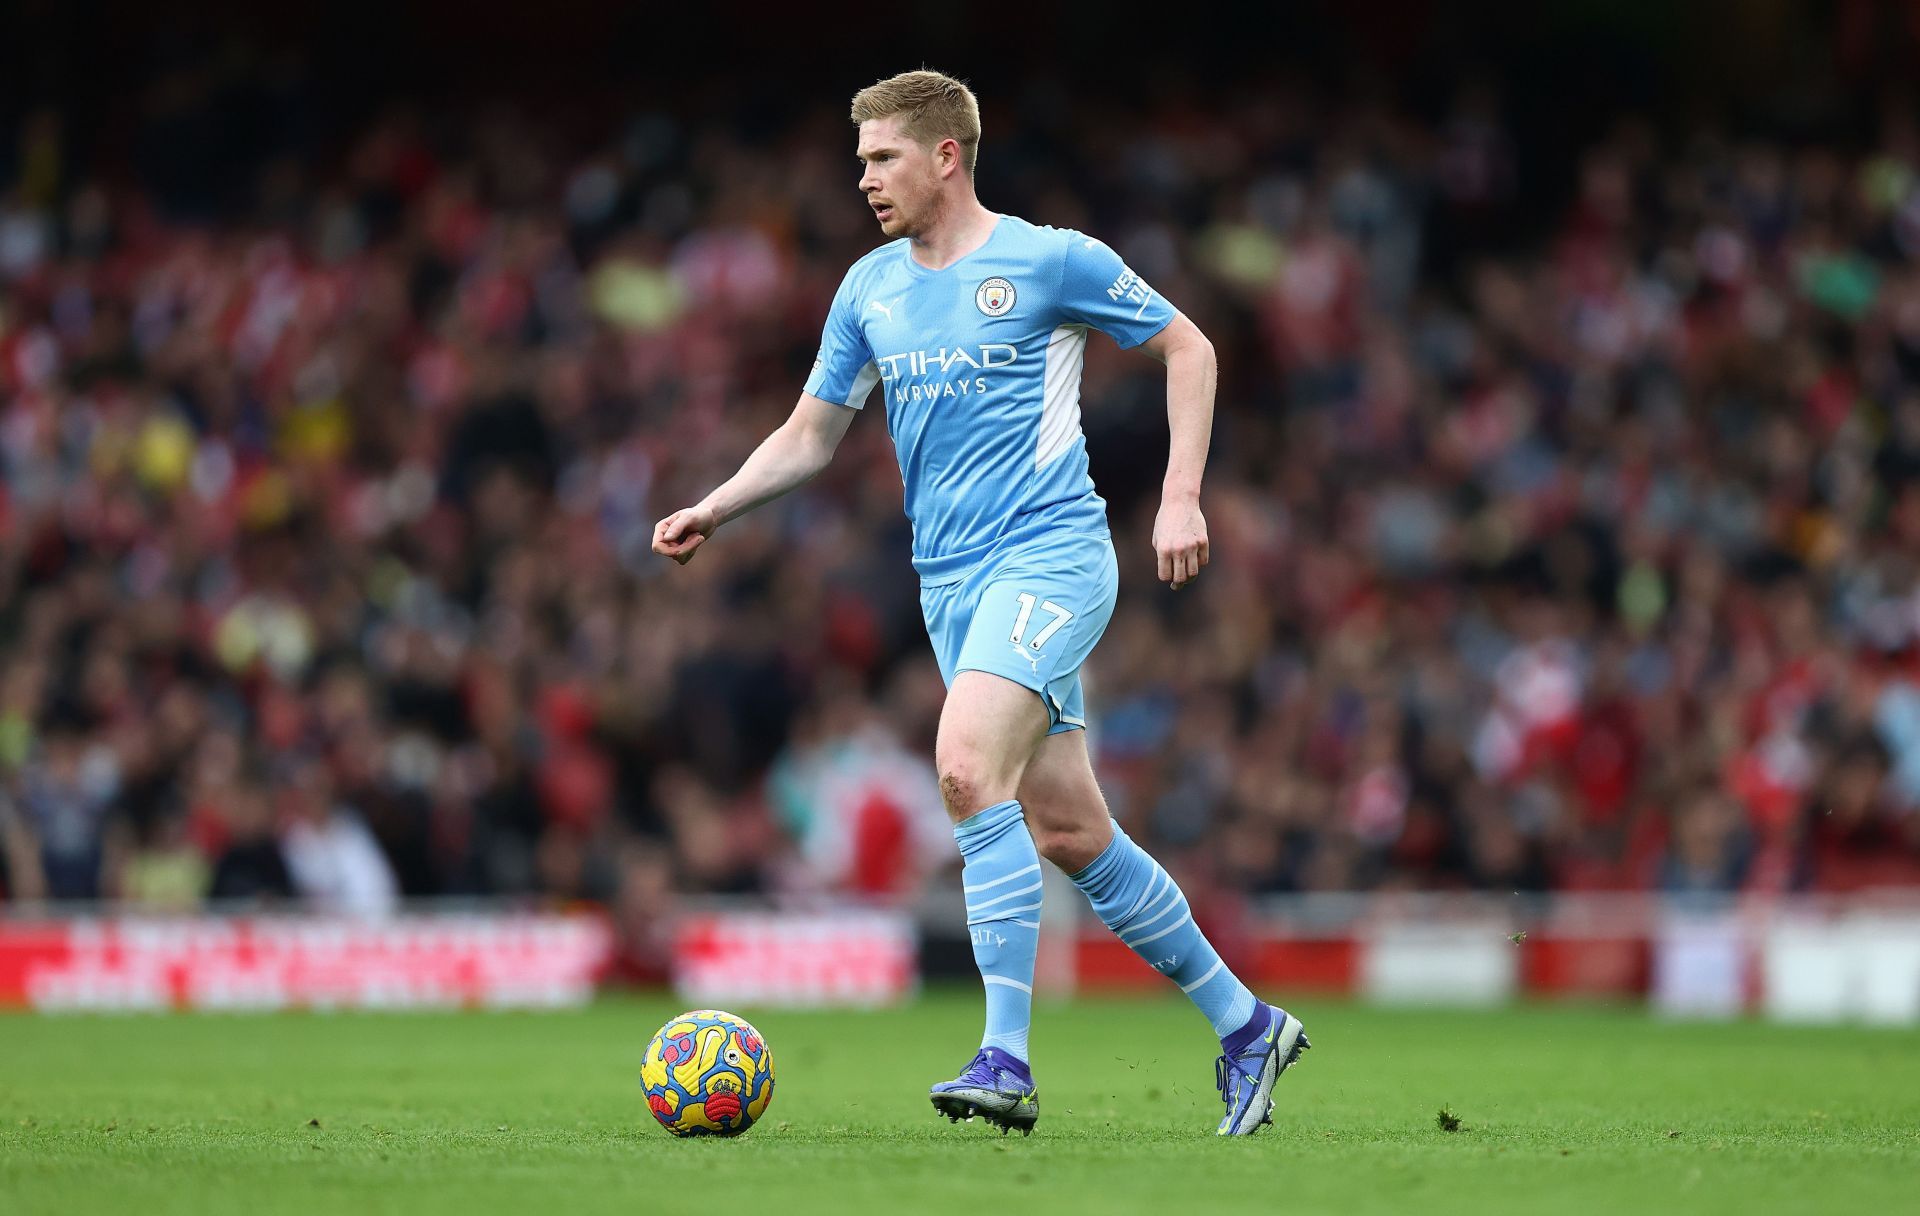 Kevin de Bruyne has been a very effective player in Premier League since 2013